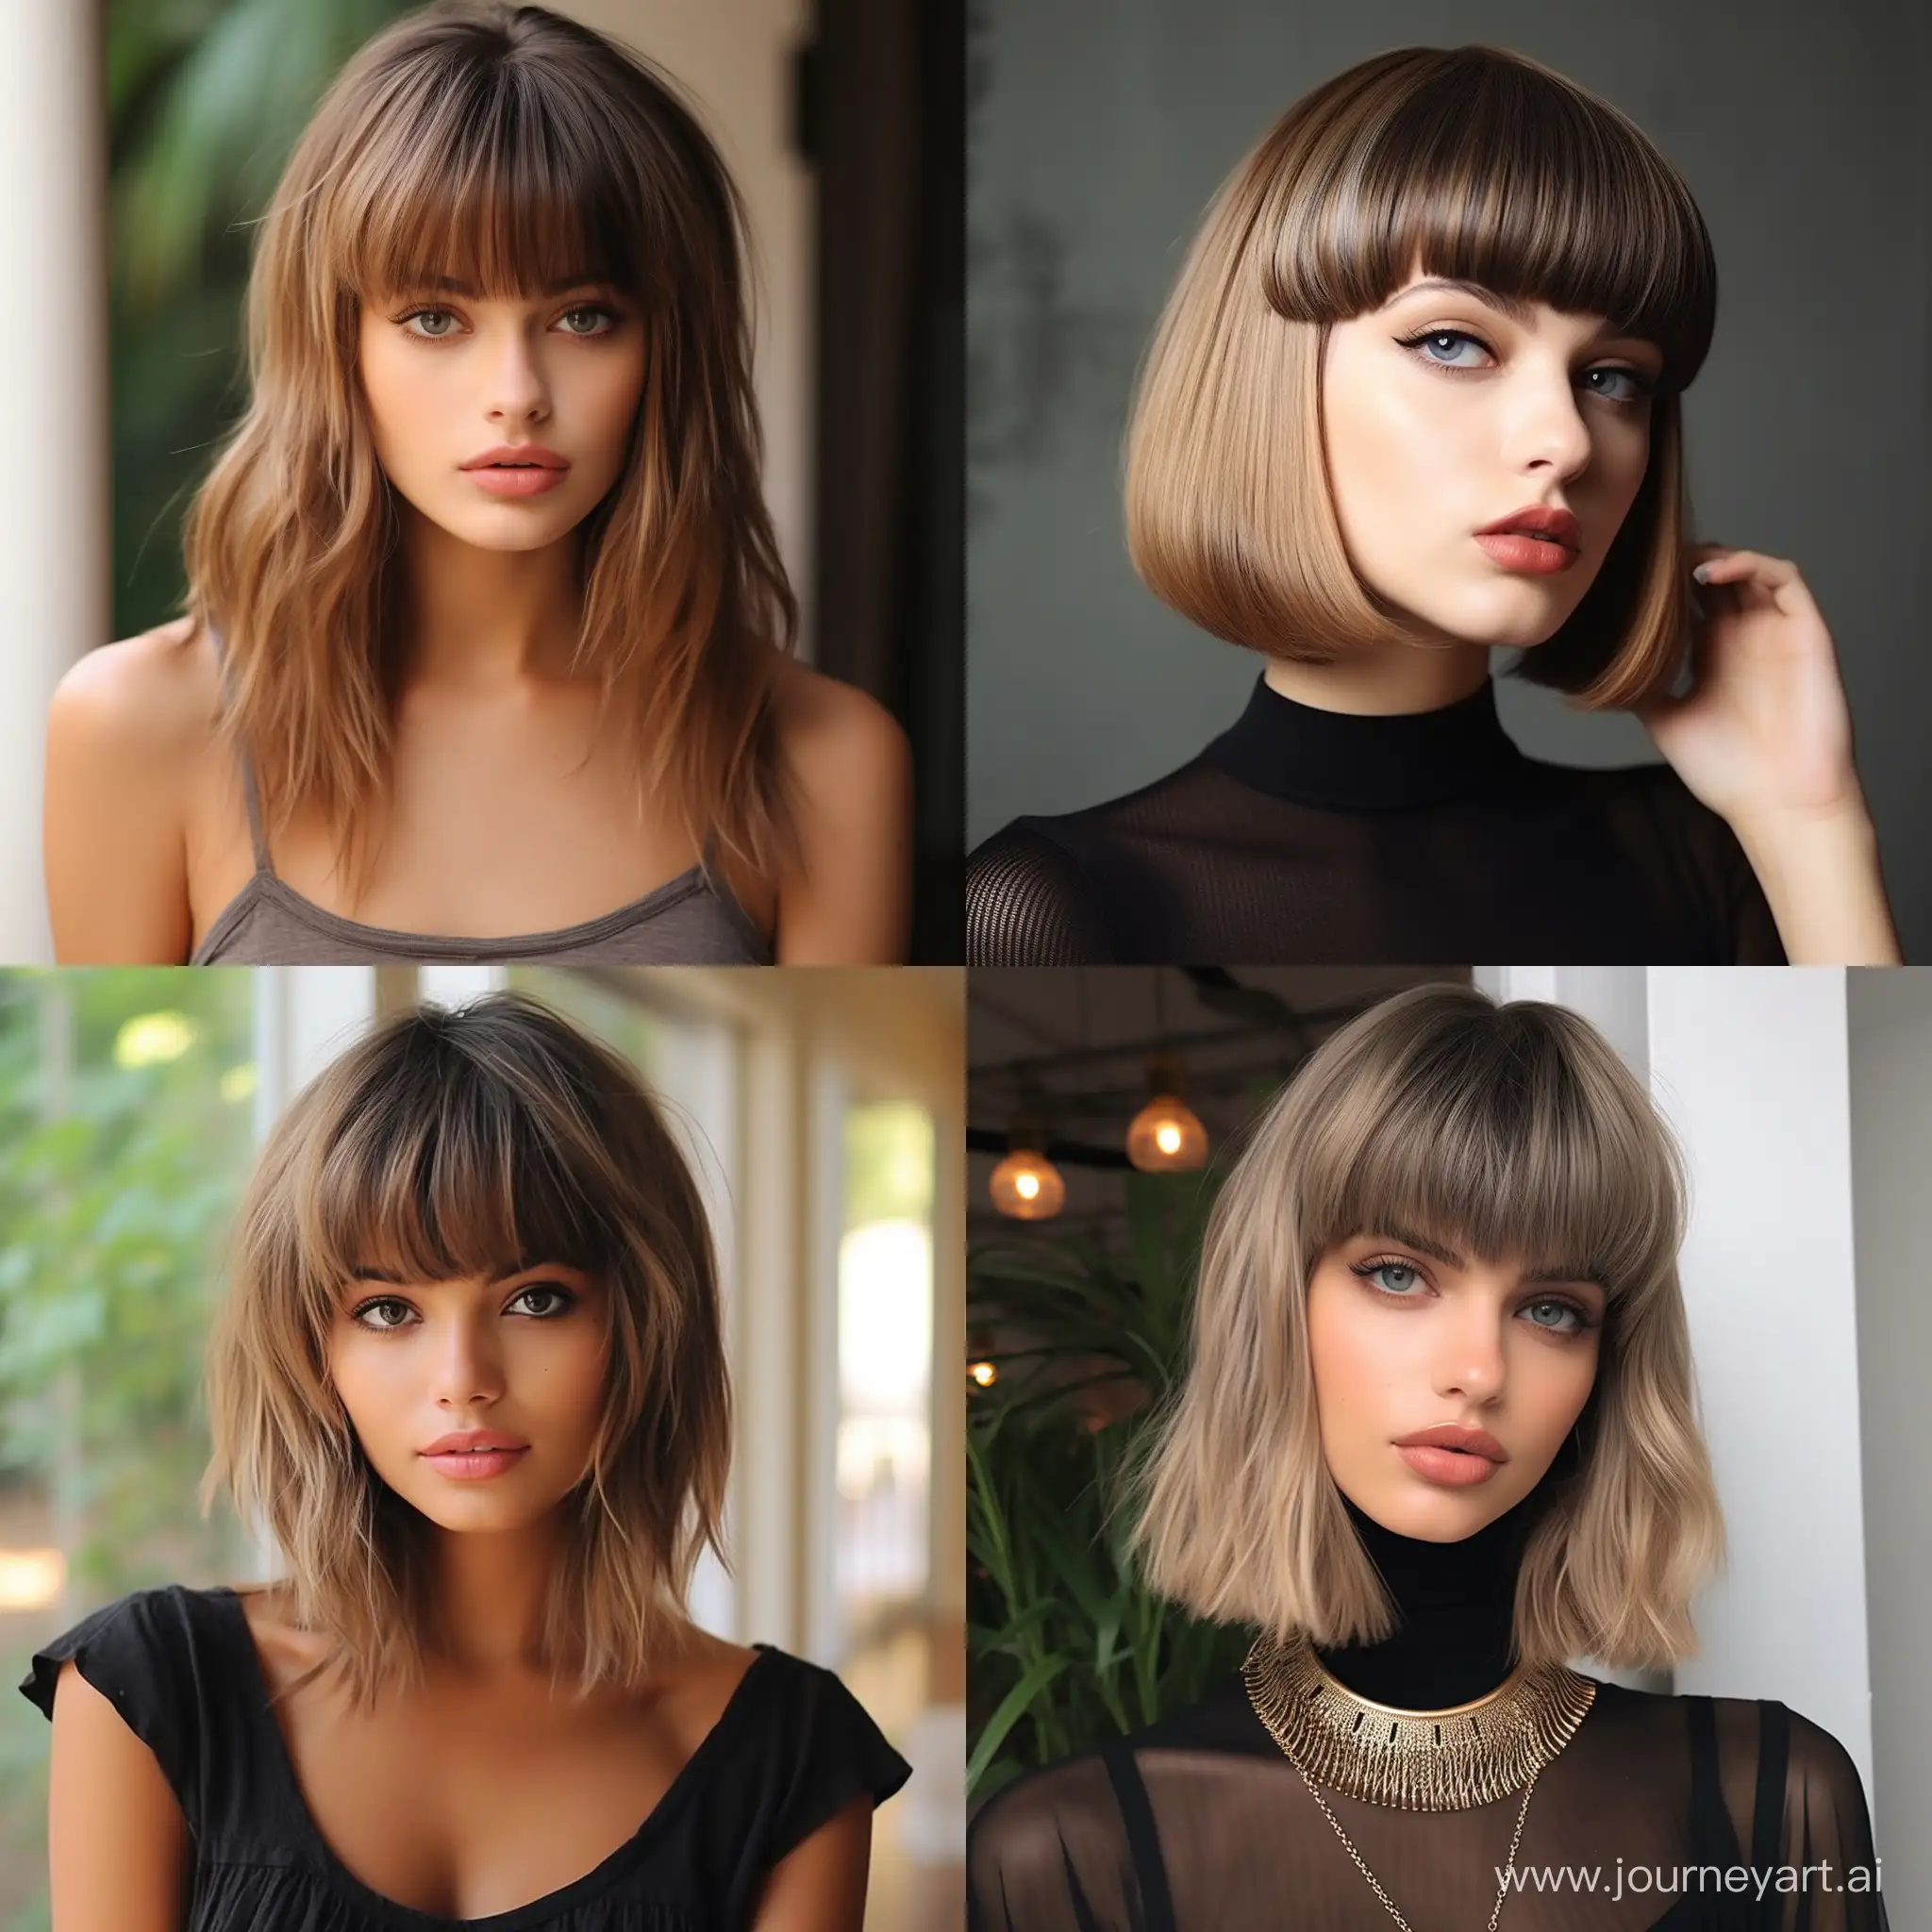 2024-Trendy-Hairstyles-with-Bangs-Artistic-Square-Aspect-Ratio